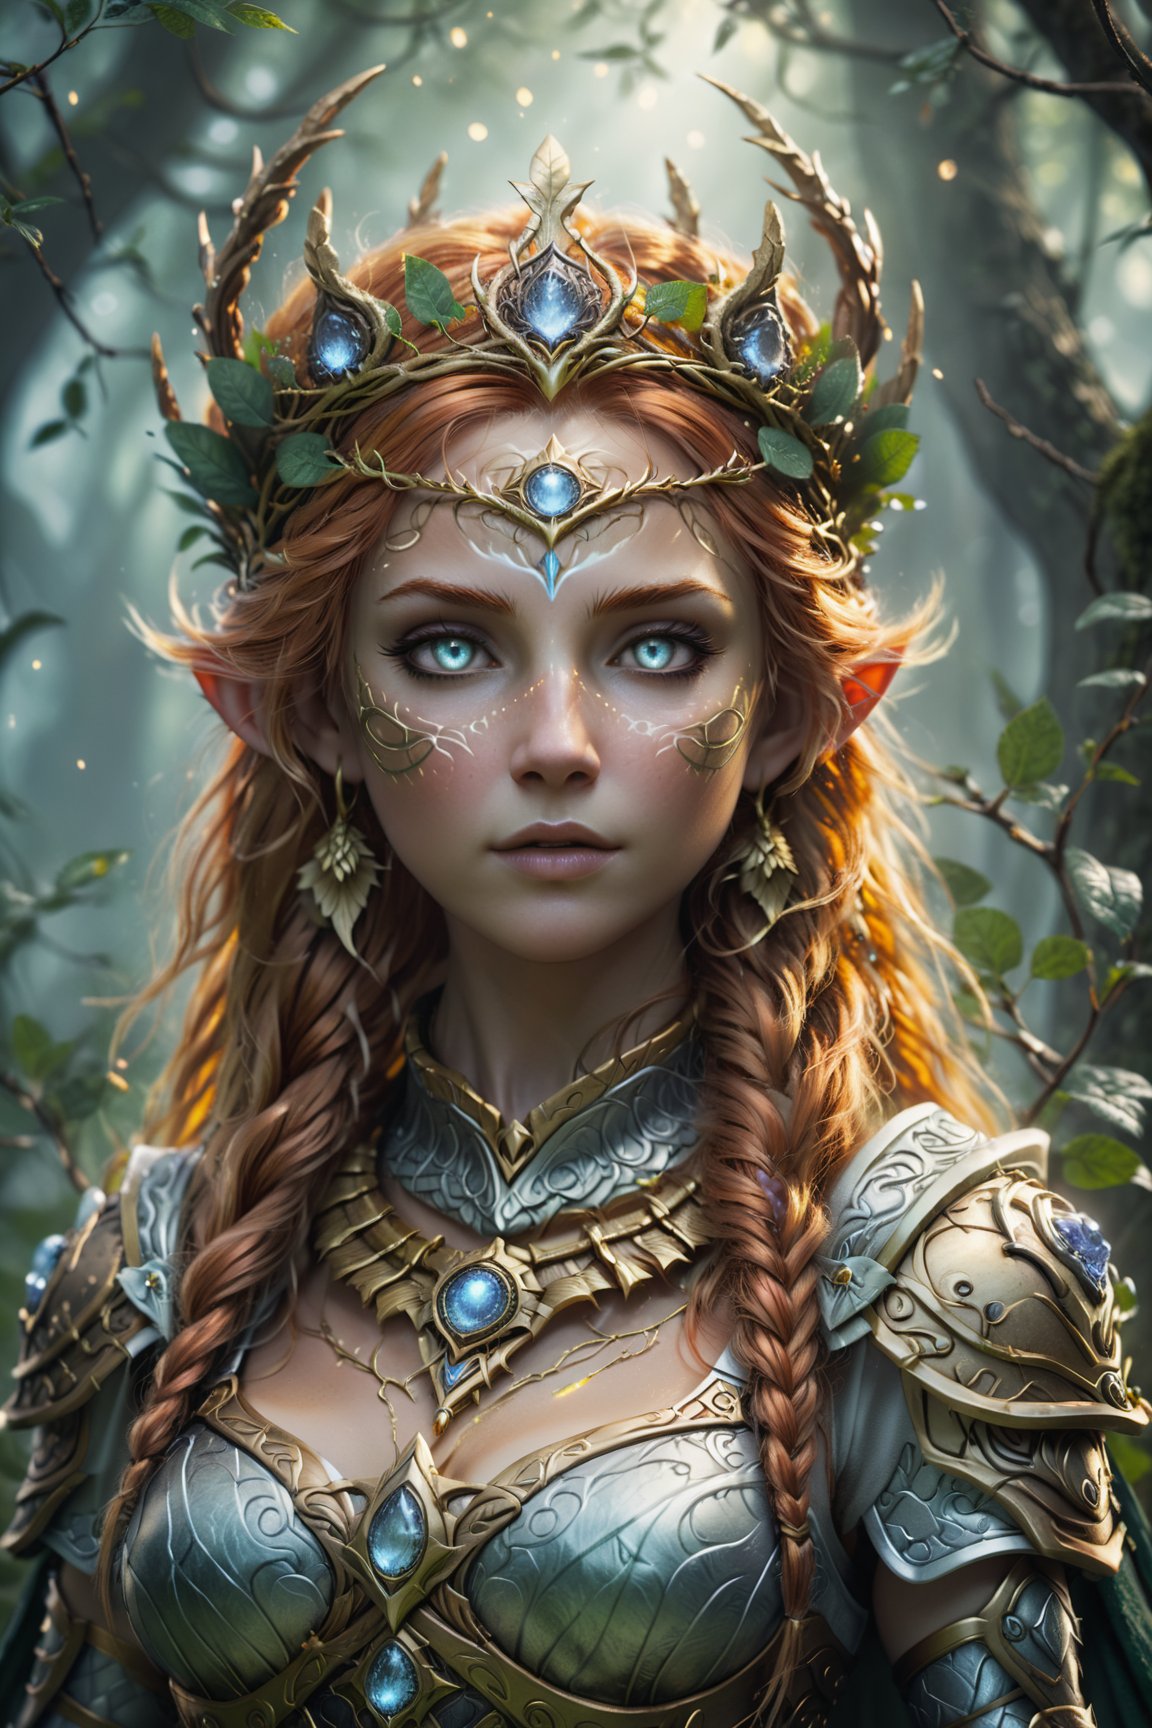 ultra detailed druid goddess with a crown made out of pure light, kind-hearted with a penetrating gaze, golden glow, extremely detailed and beautiful face, gorgeous body, soft copper-colored hair, she wears druid armor, ethereal, magical glow, fantasy art by Mschiffer, ultra sharp focus, ethereal glowy smoke, light particles, roses and vines, brambles

,dfdd,more detail XL,NylaUsha